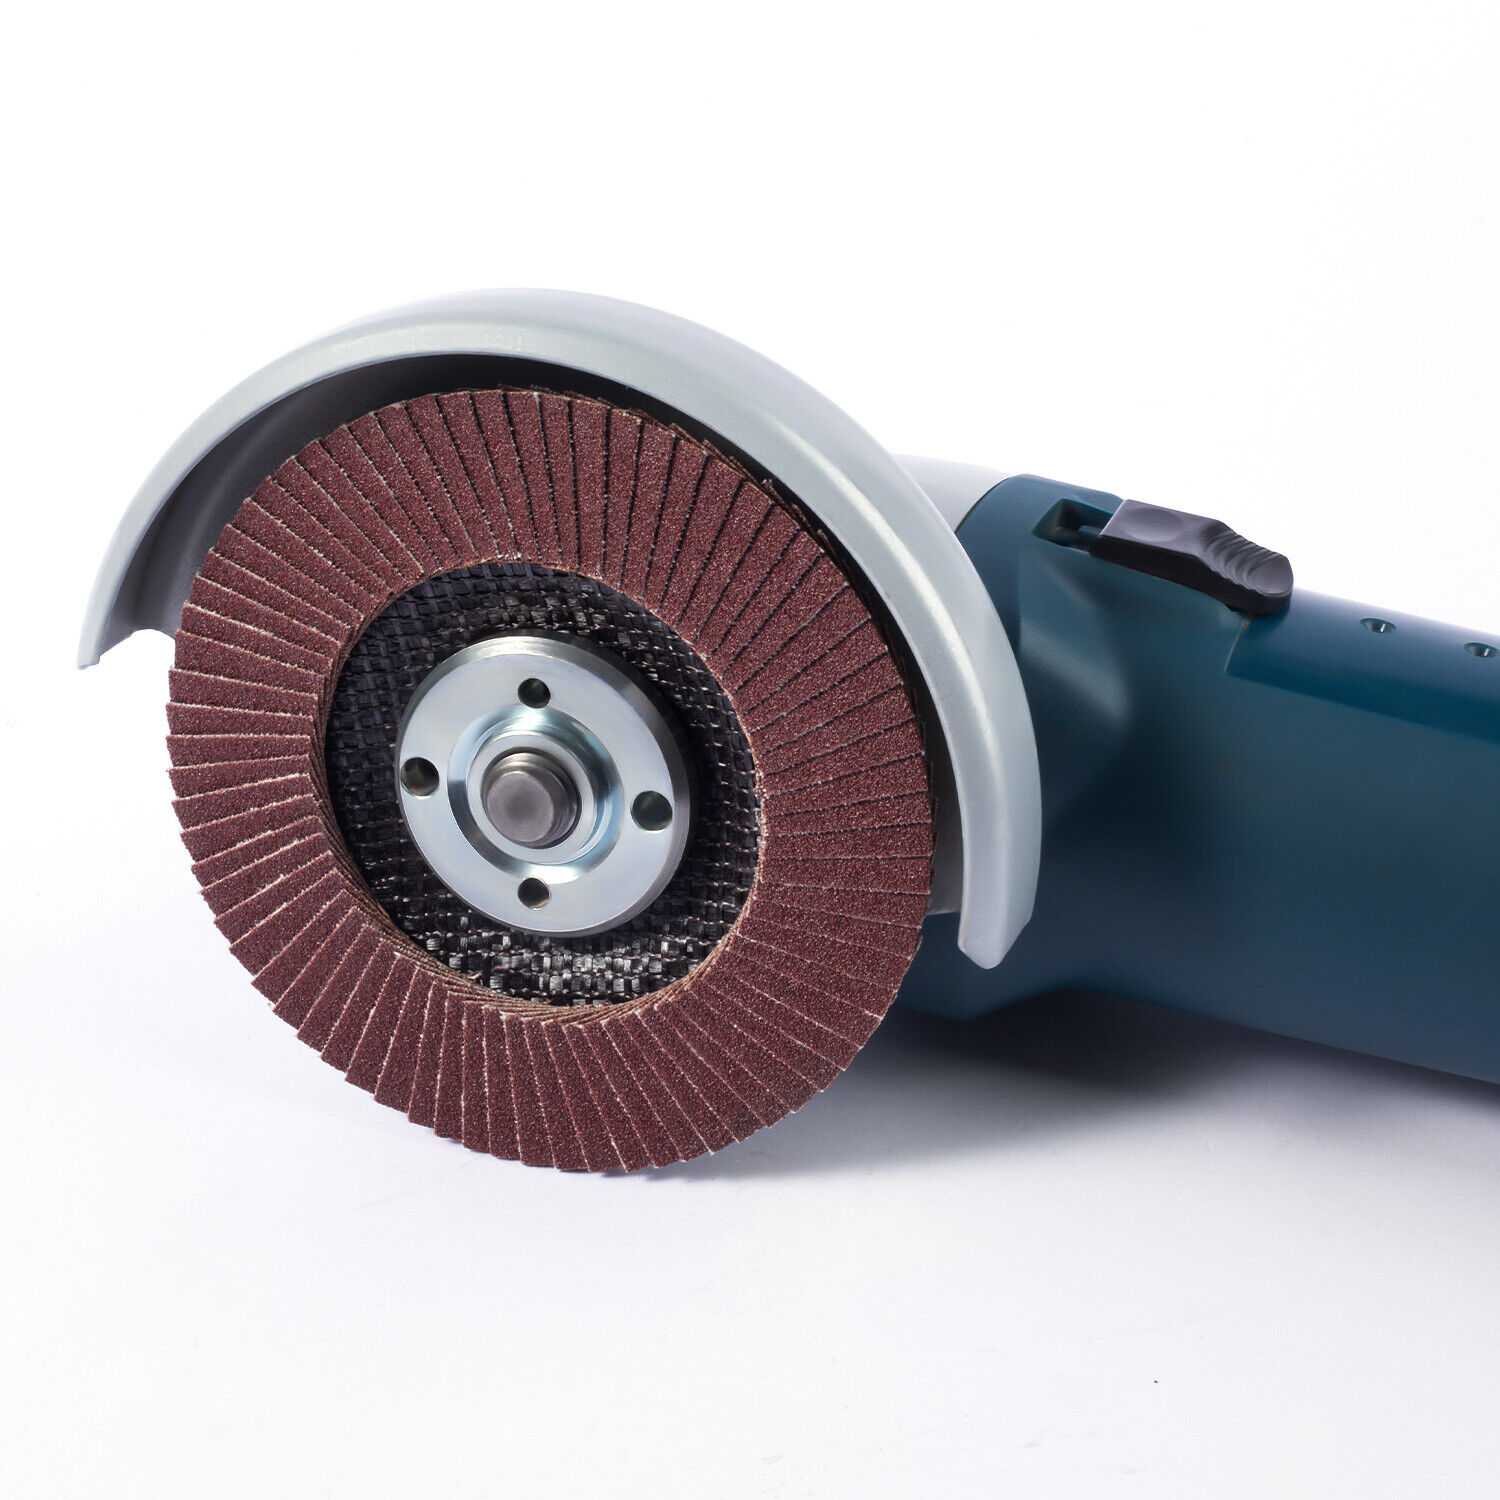 20x 4.5" 4-1/2 Flap Disc 40 60 80 120 Grit Angle Grinder Sanding Grinding Wheels Satc Does Not Apply - фотография #7